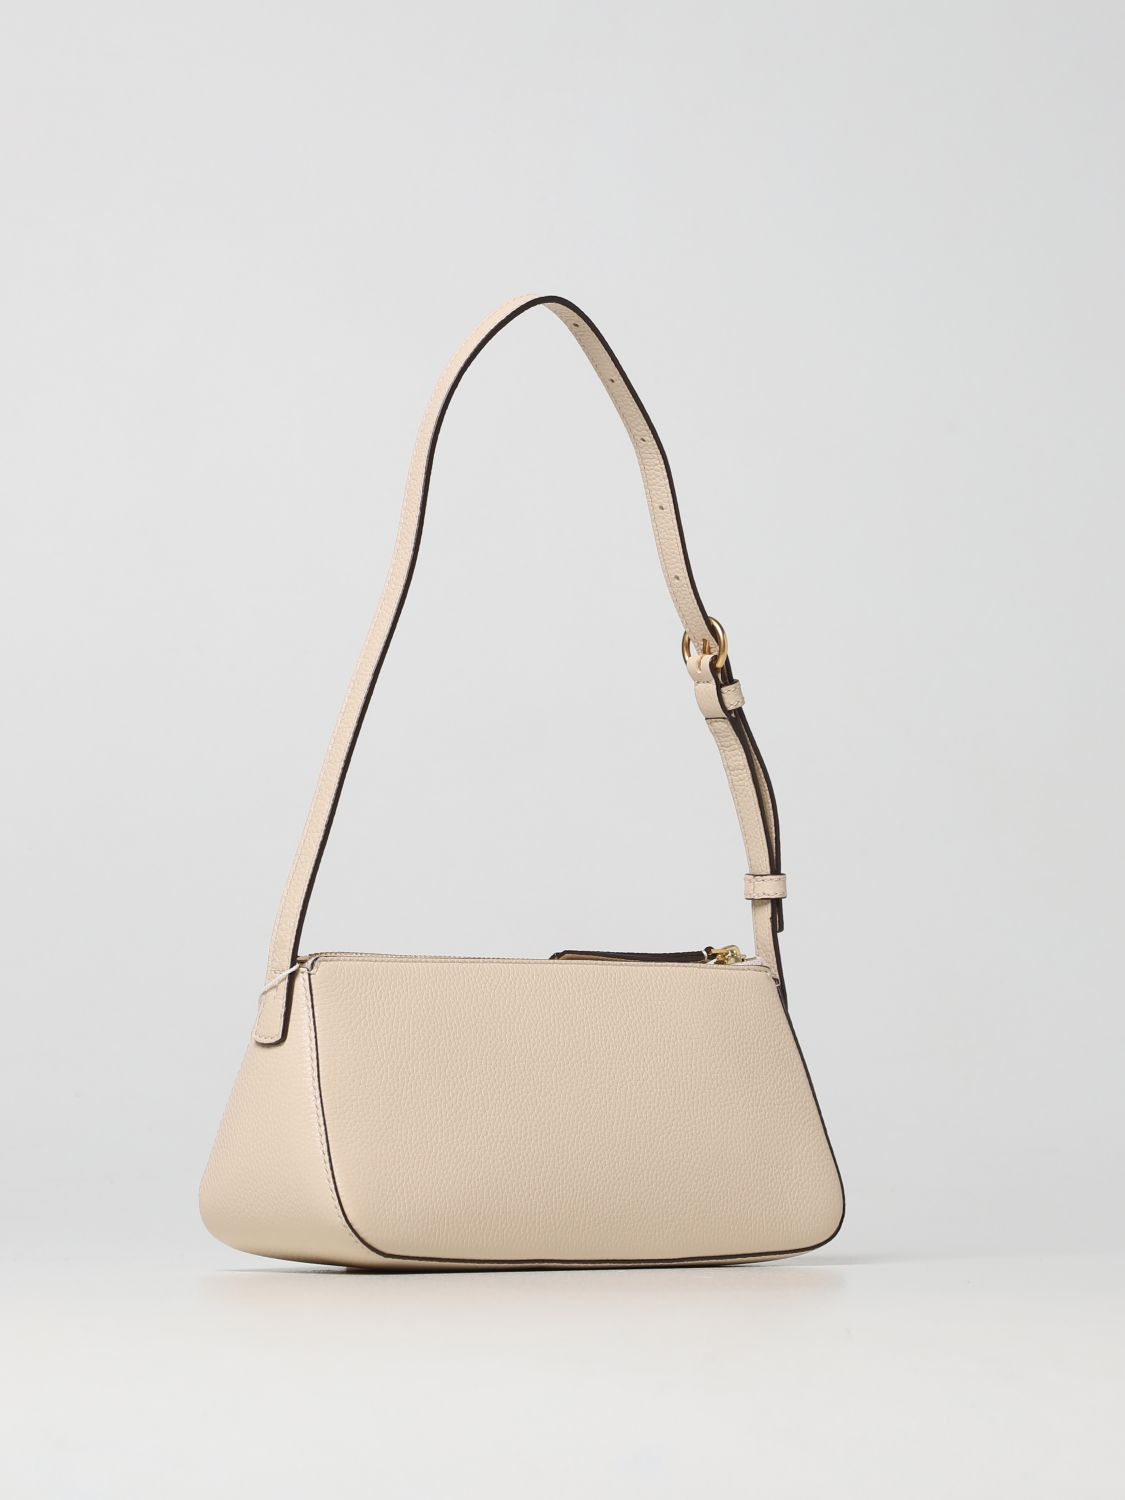 TORY BURCH: Mcgraw Wedge leather bag - Ivory | Shoulder Bag Tory Burch ...